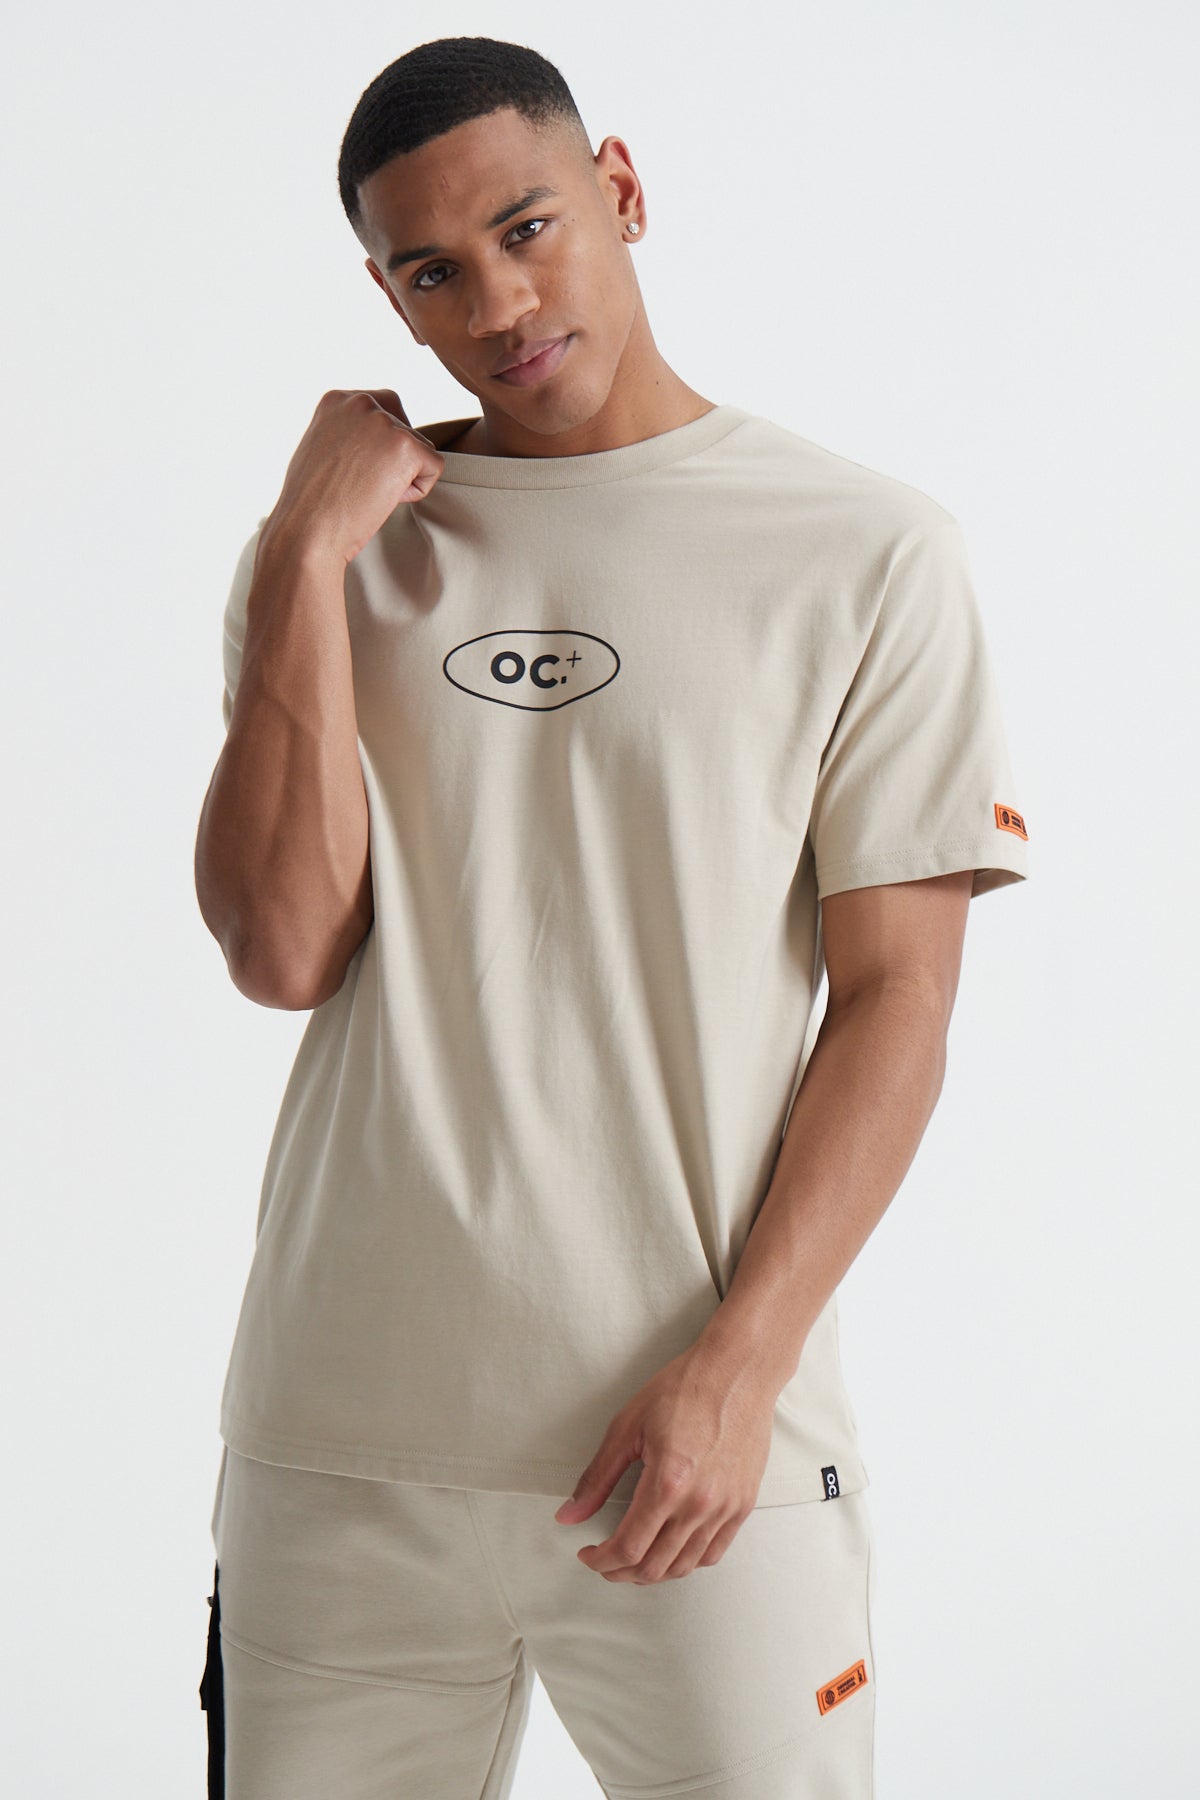 Off The Grid T-shirt - Sand Stone